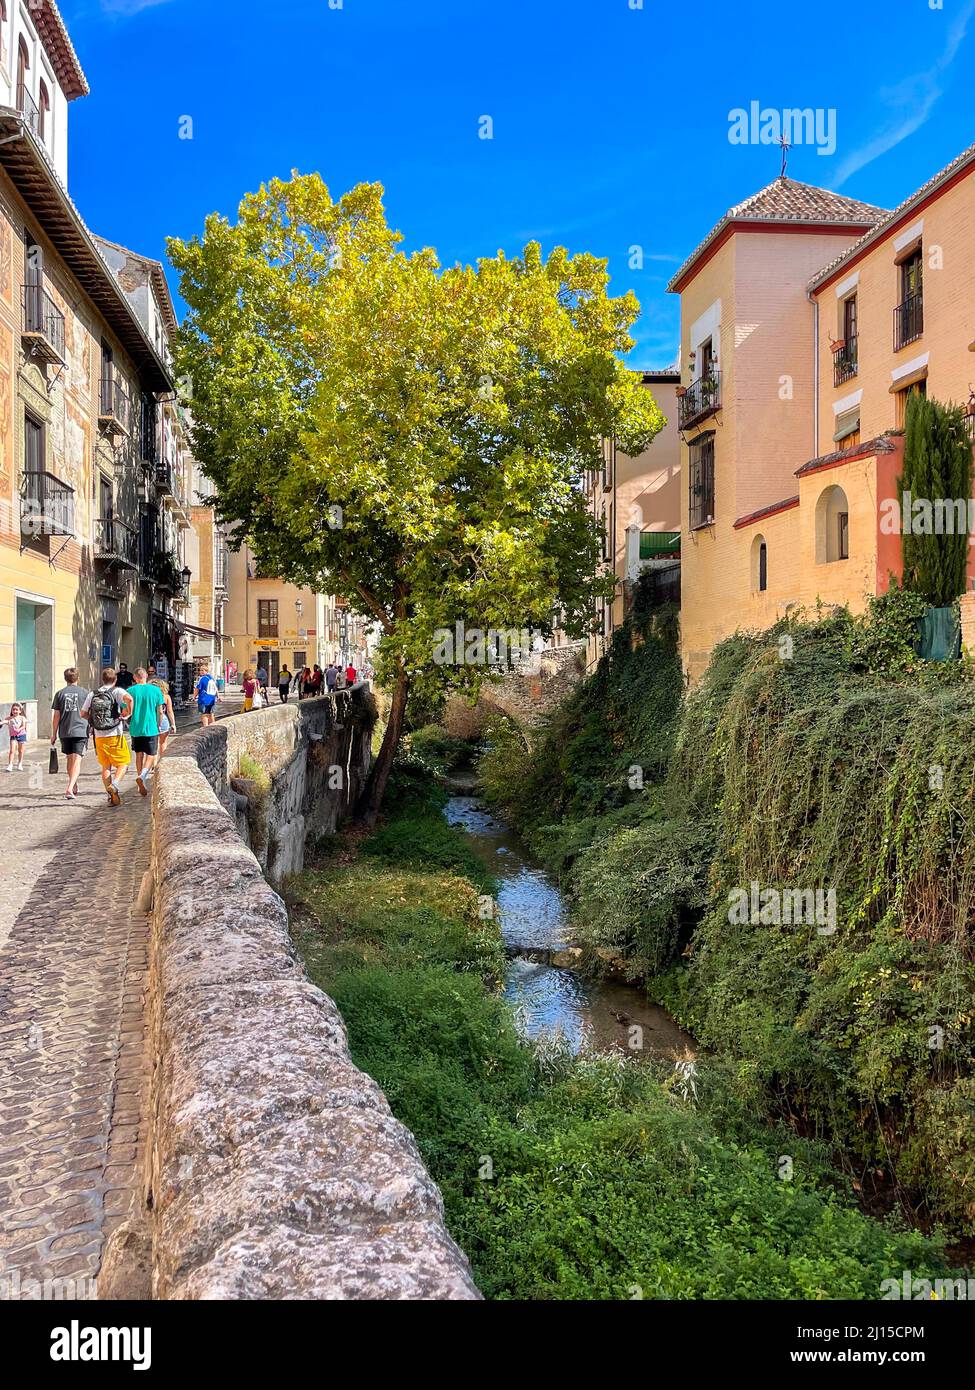 Tourists enjoying their walk in the picturesque district of Albaicin, in the Old Town of Granada, in Andalusia region, southern Spain, Europe. Stock Photo